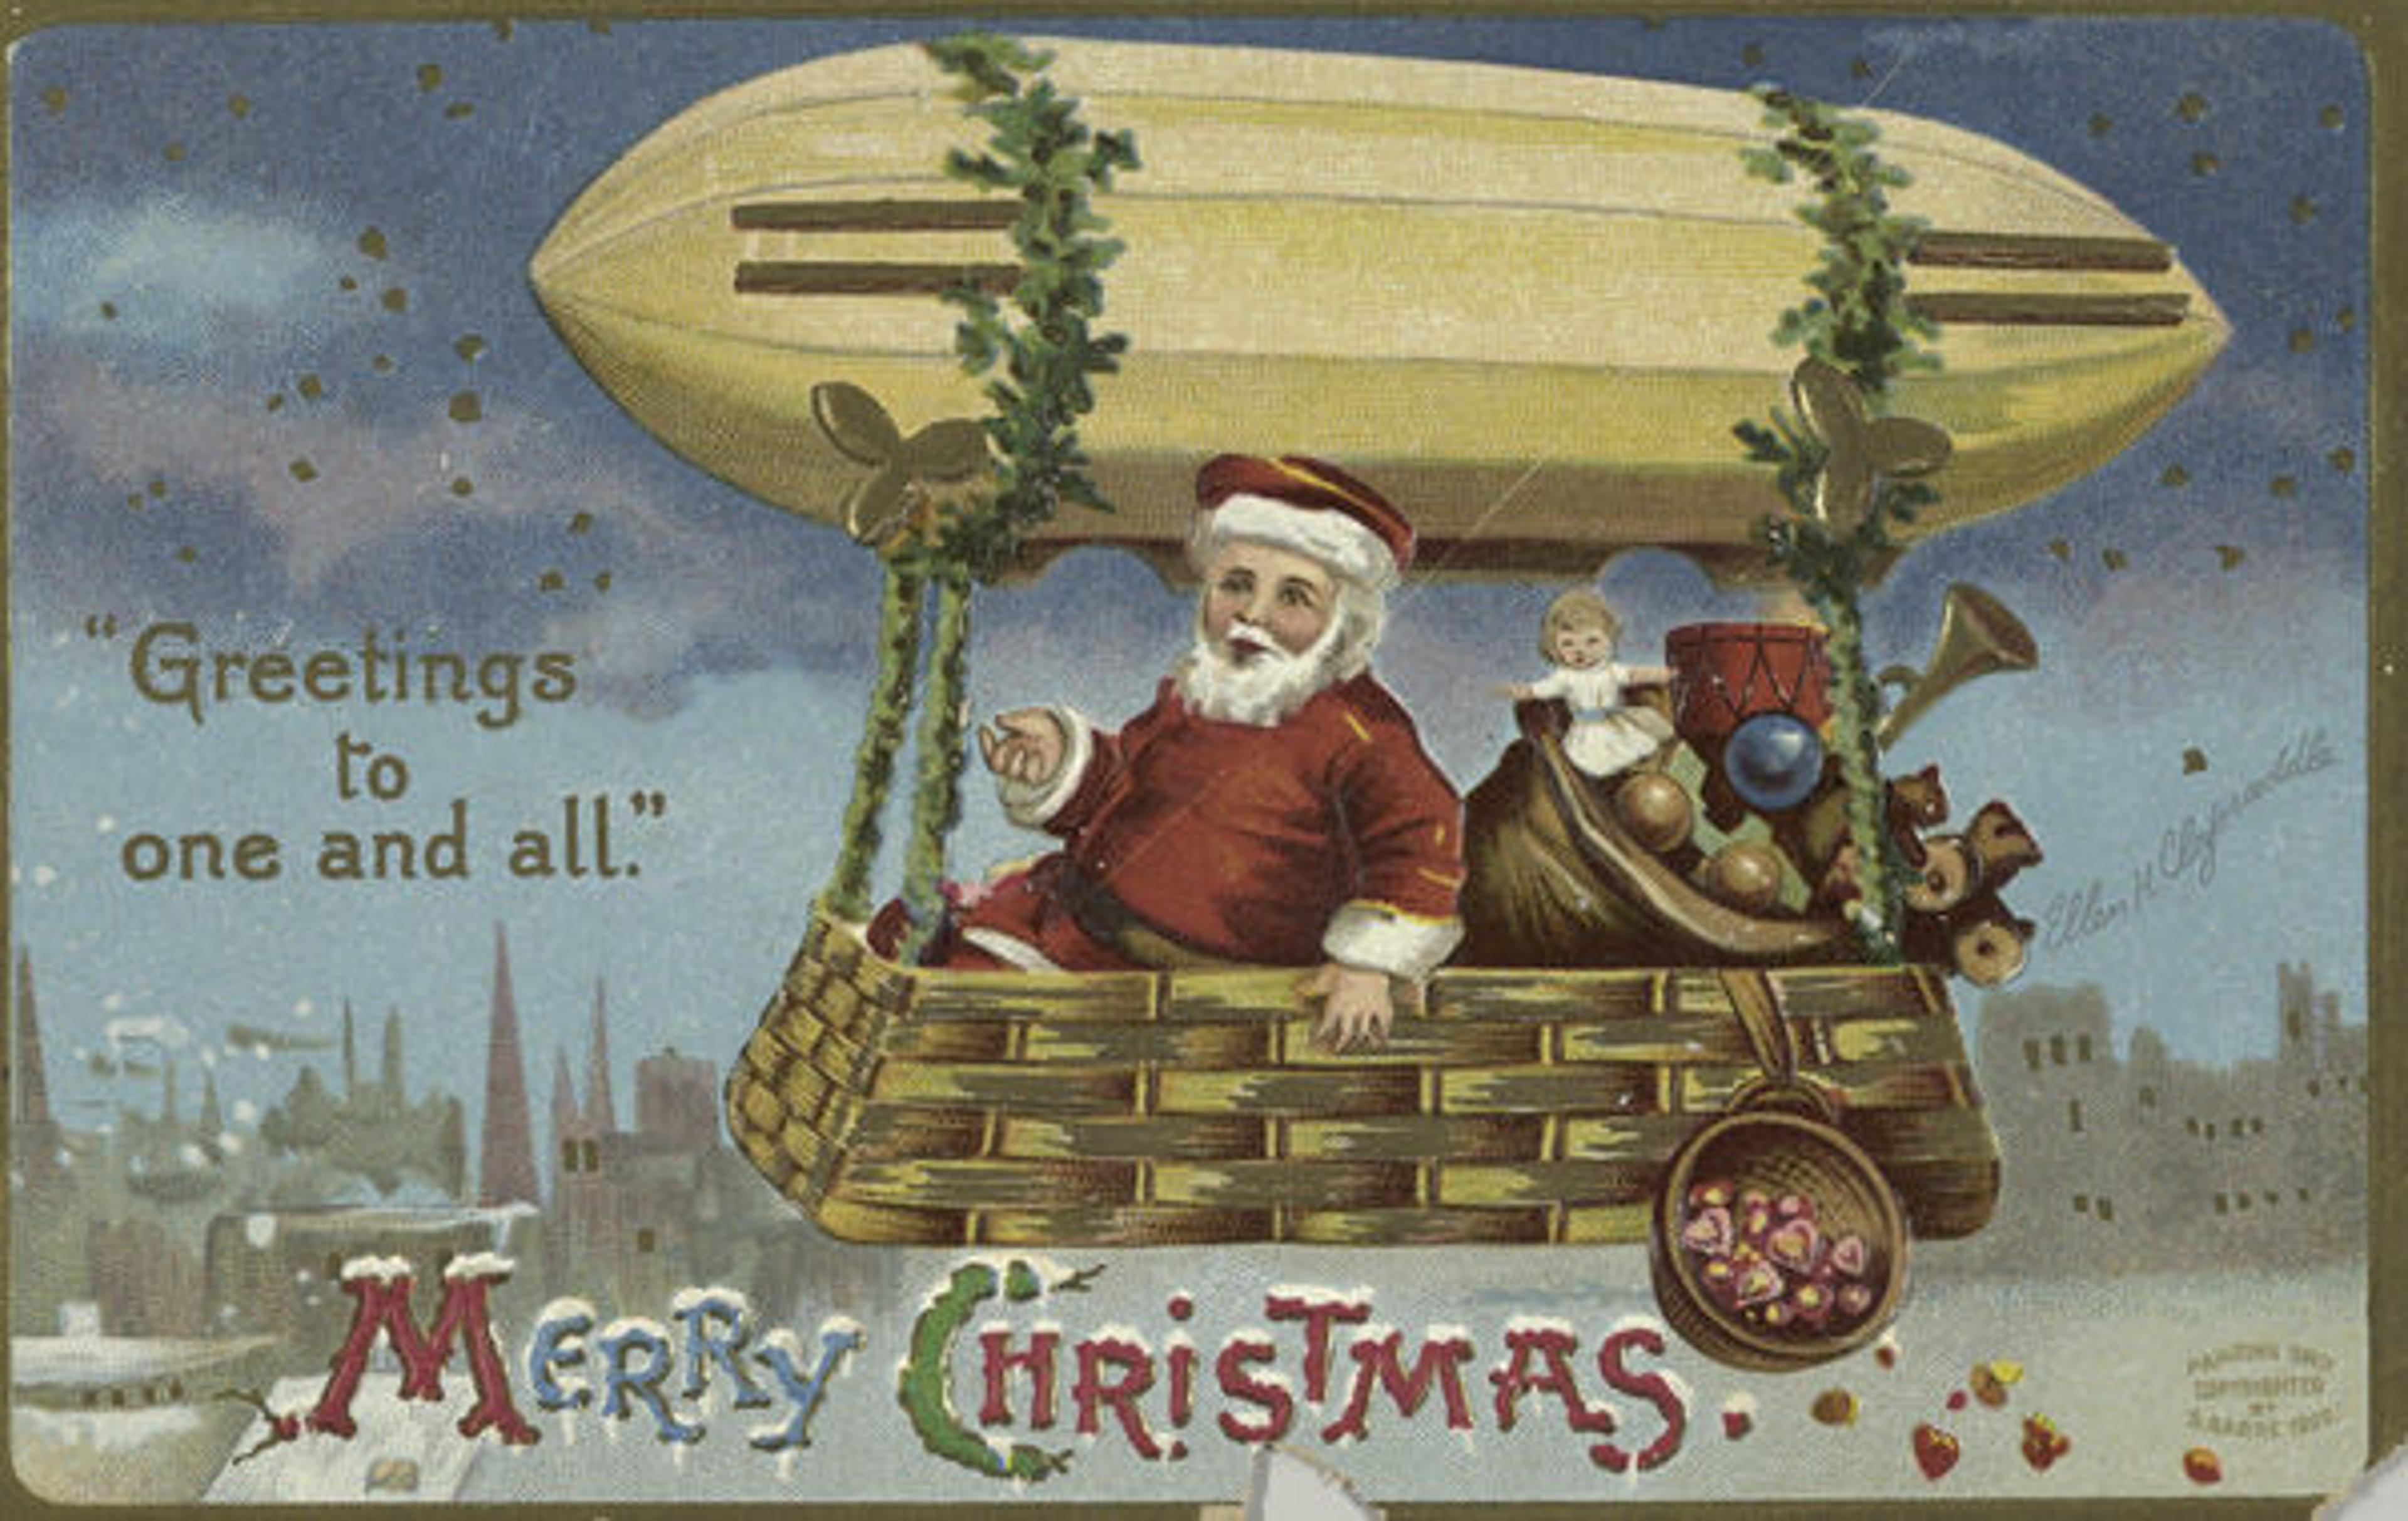 'Greetings to one and all,' Merry Christmas, early 20th century